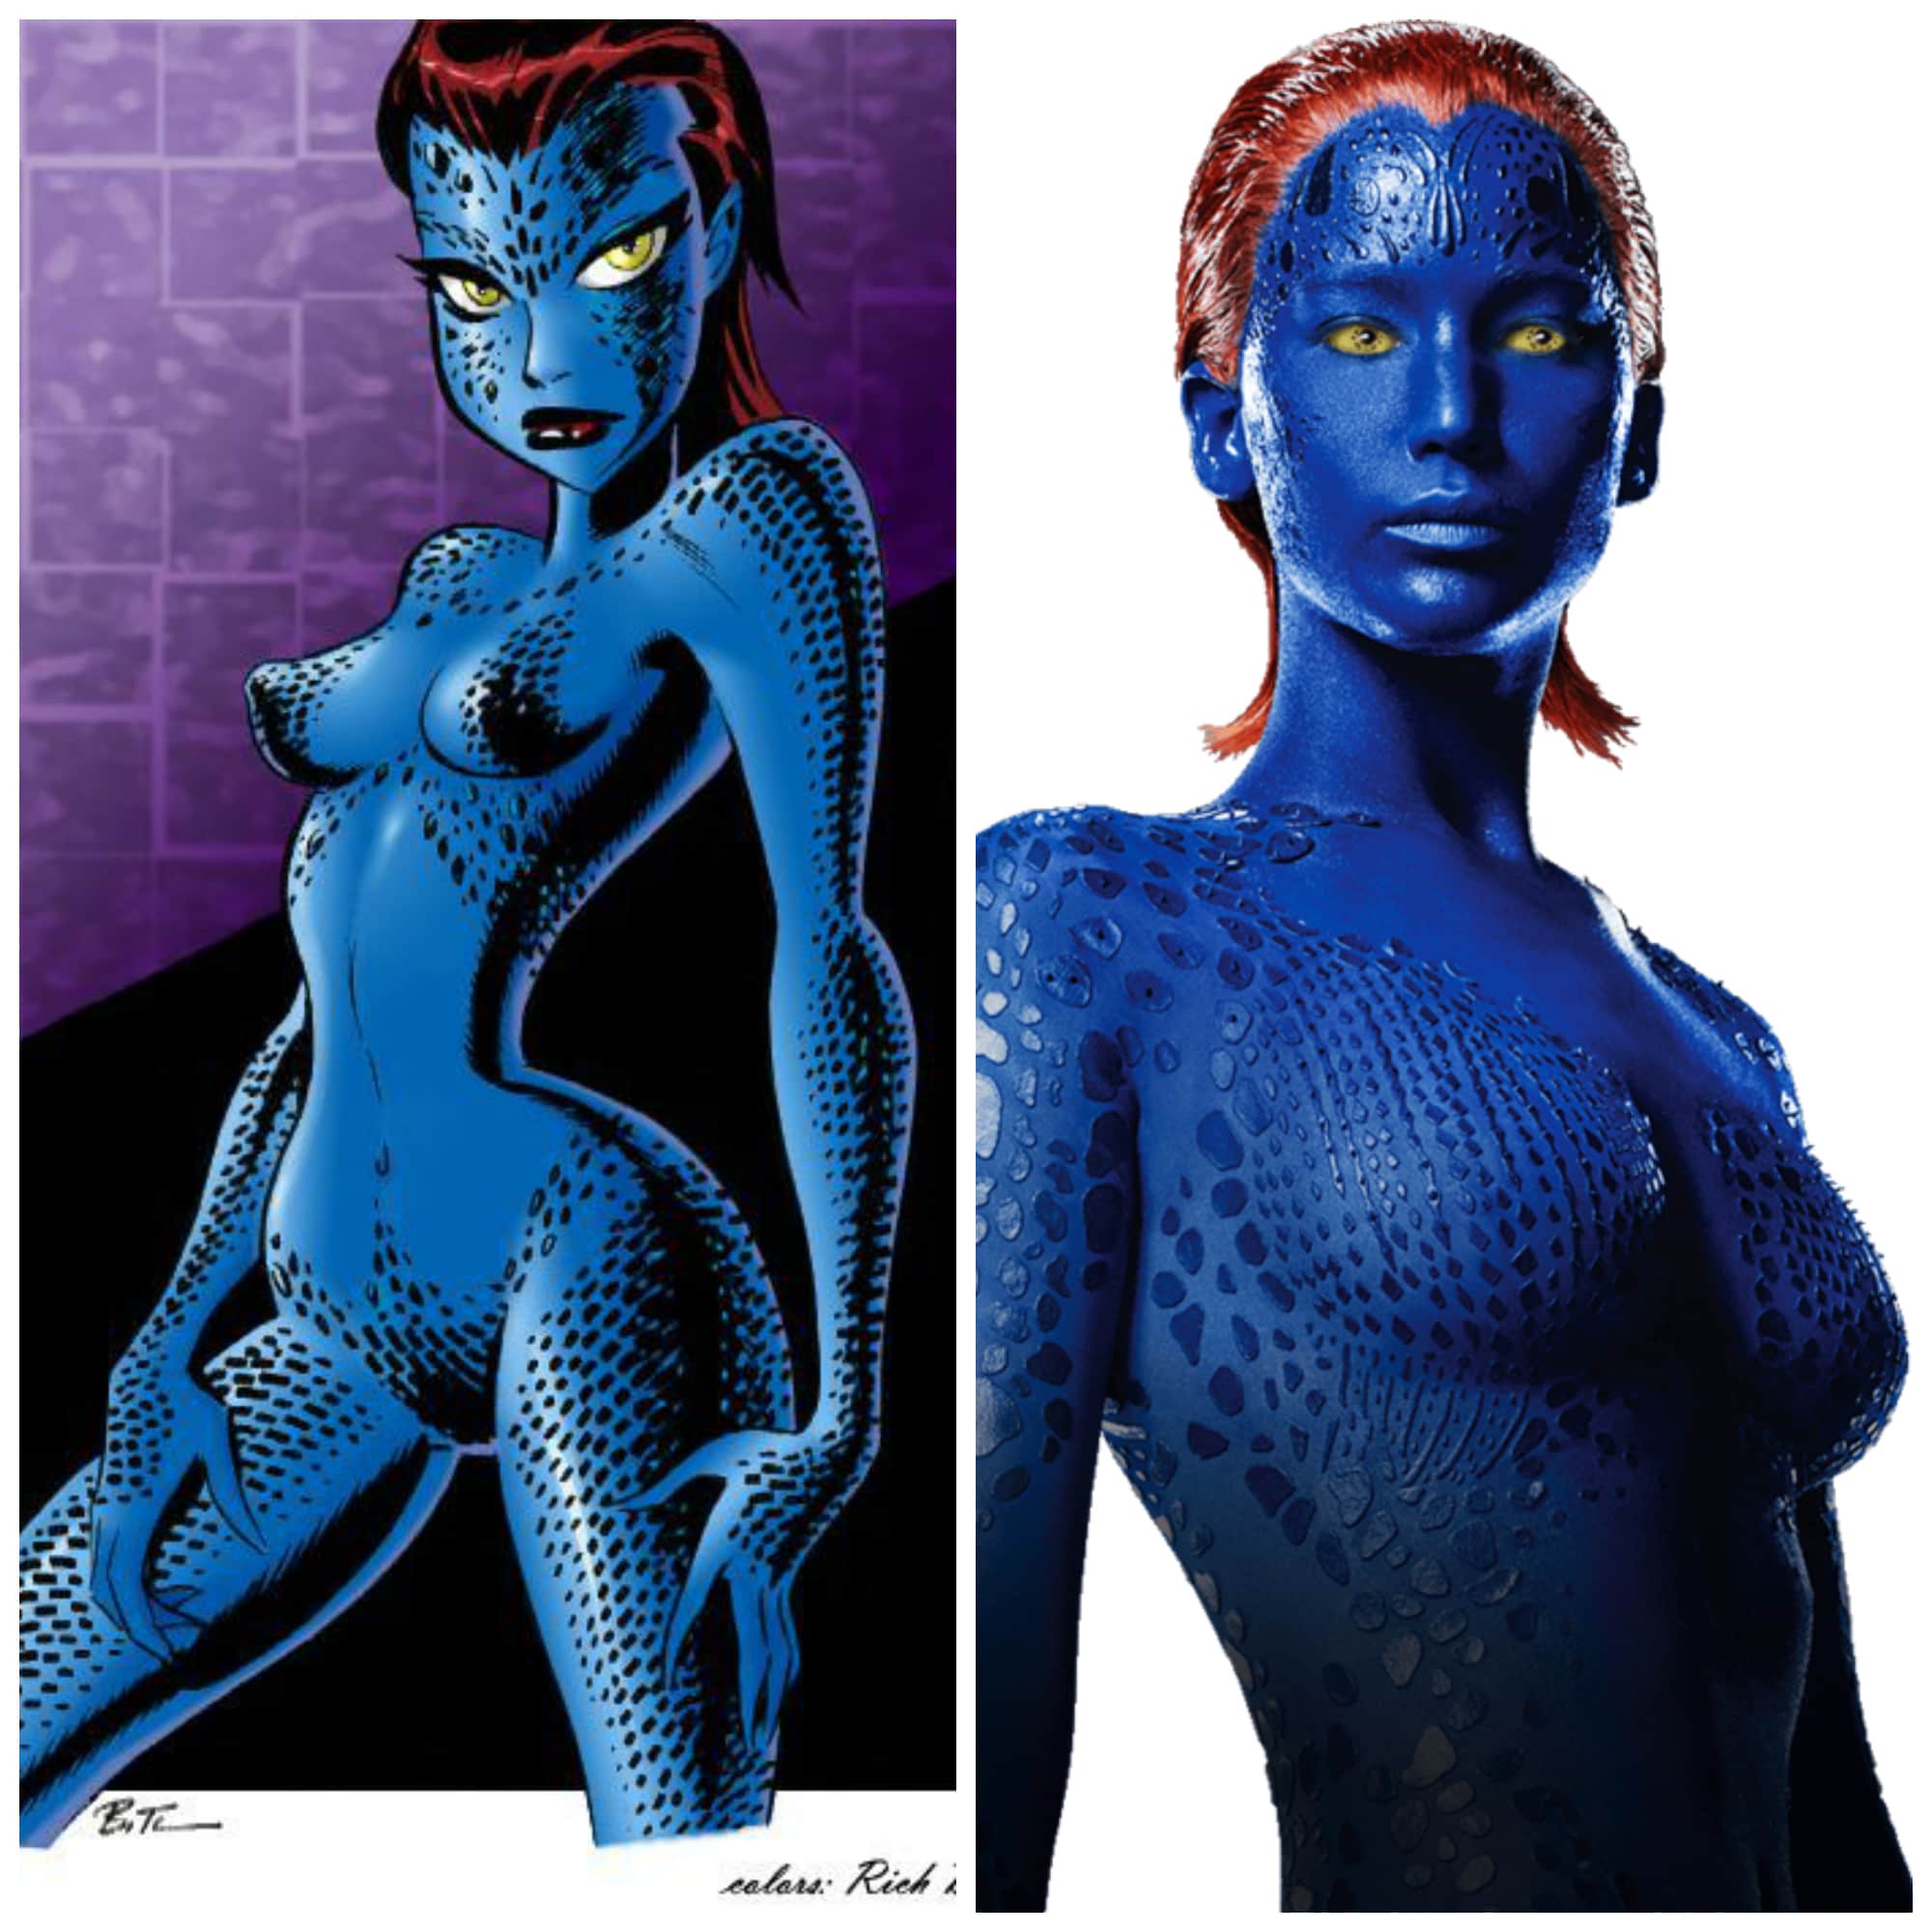 Mystique from xmen played by Jennifer Lawrence